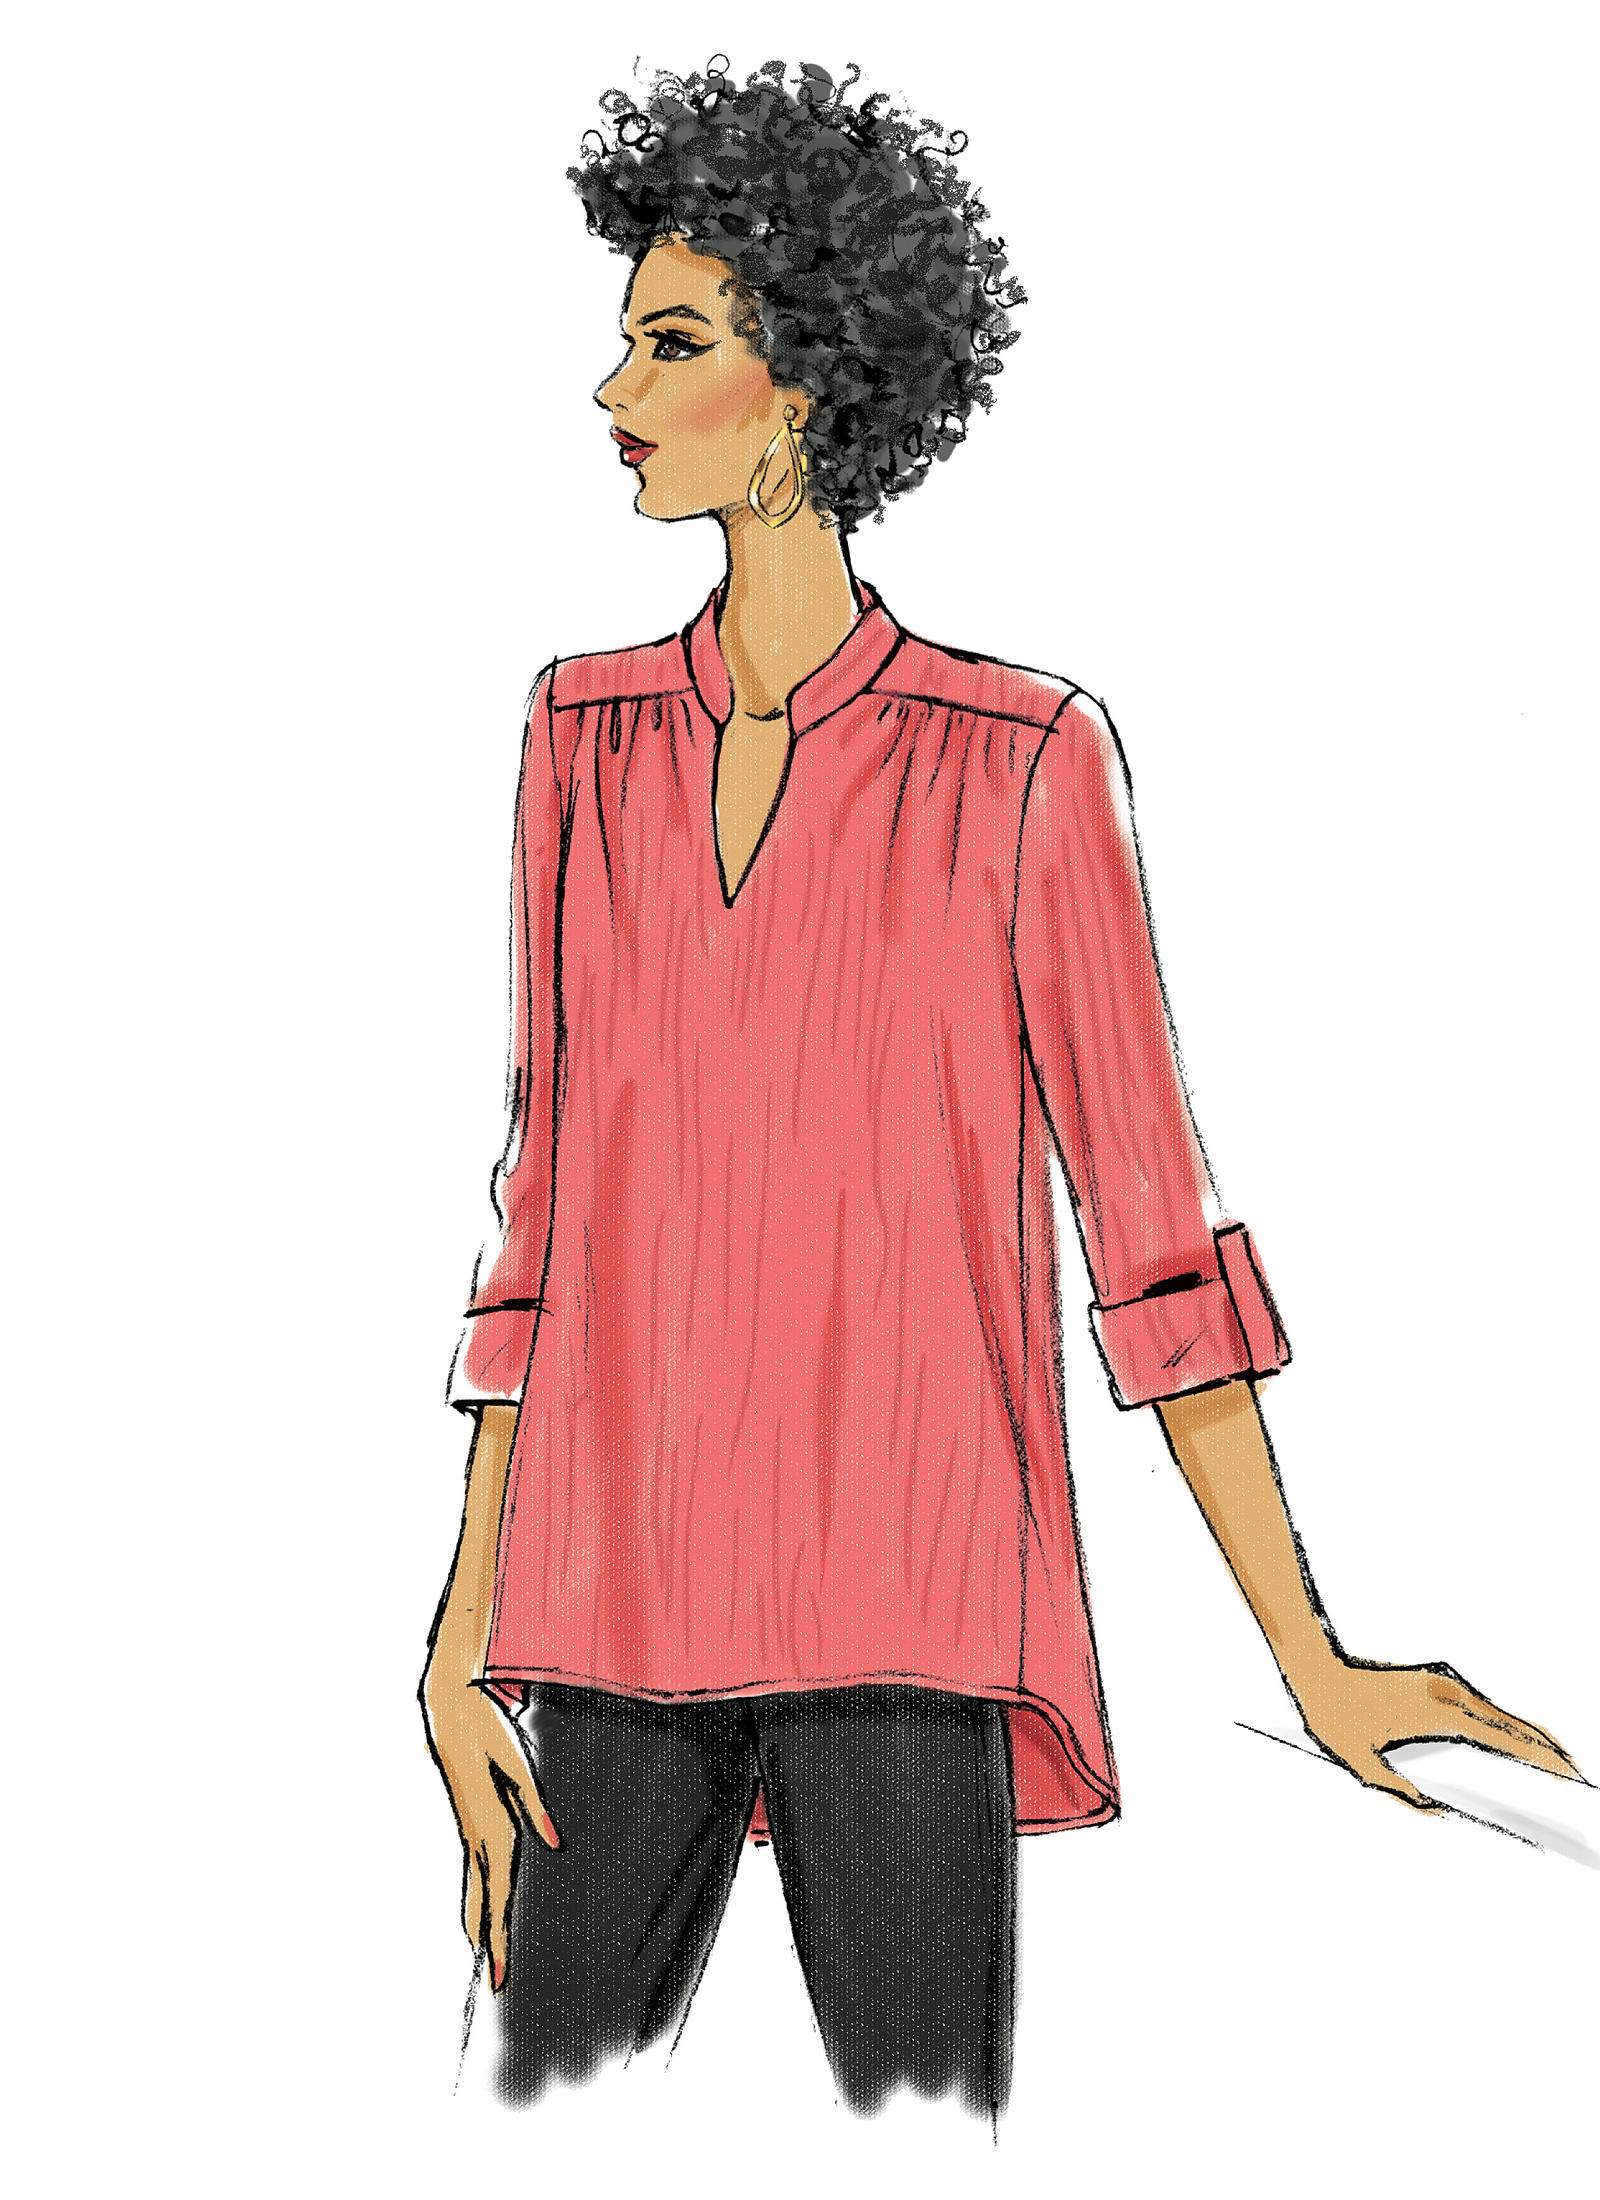 Drawing of a woman in tucked top